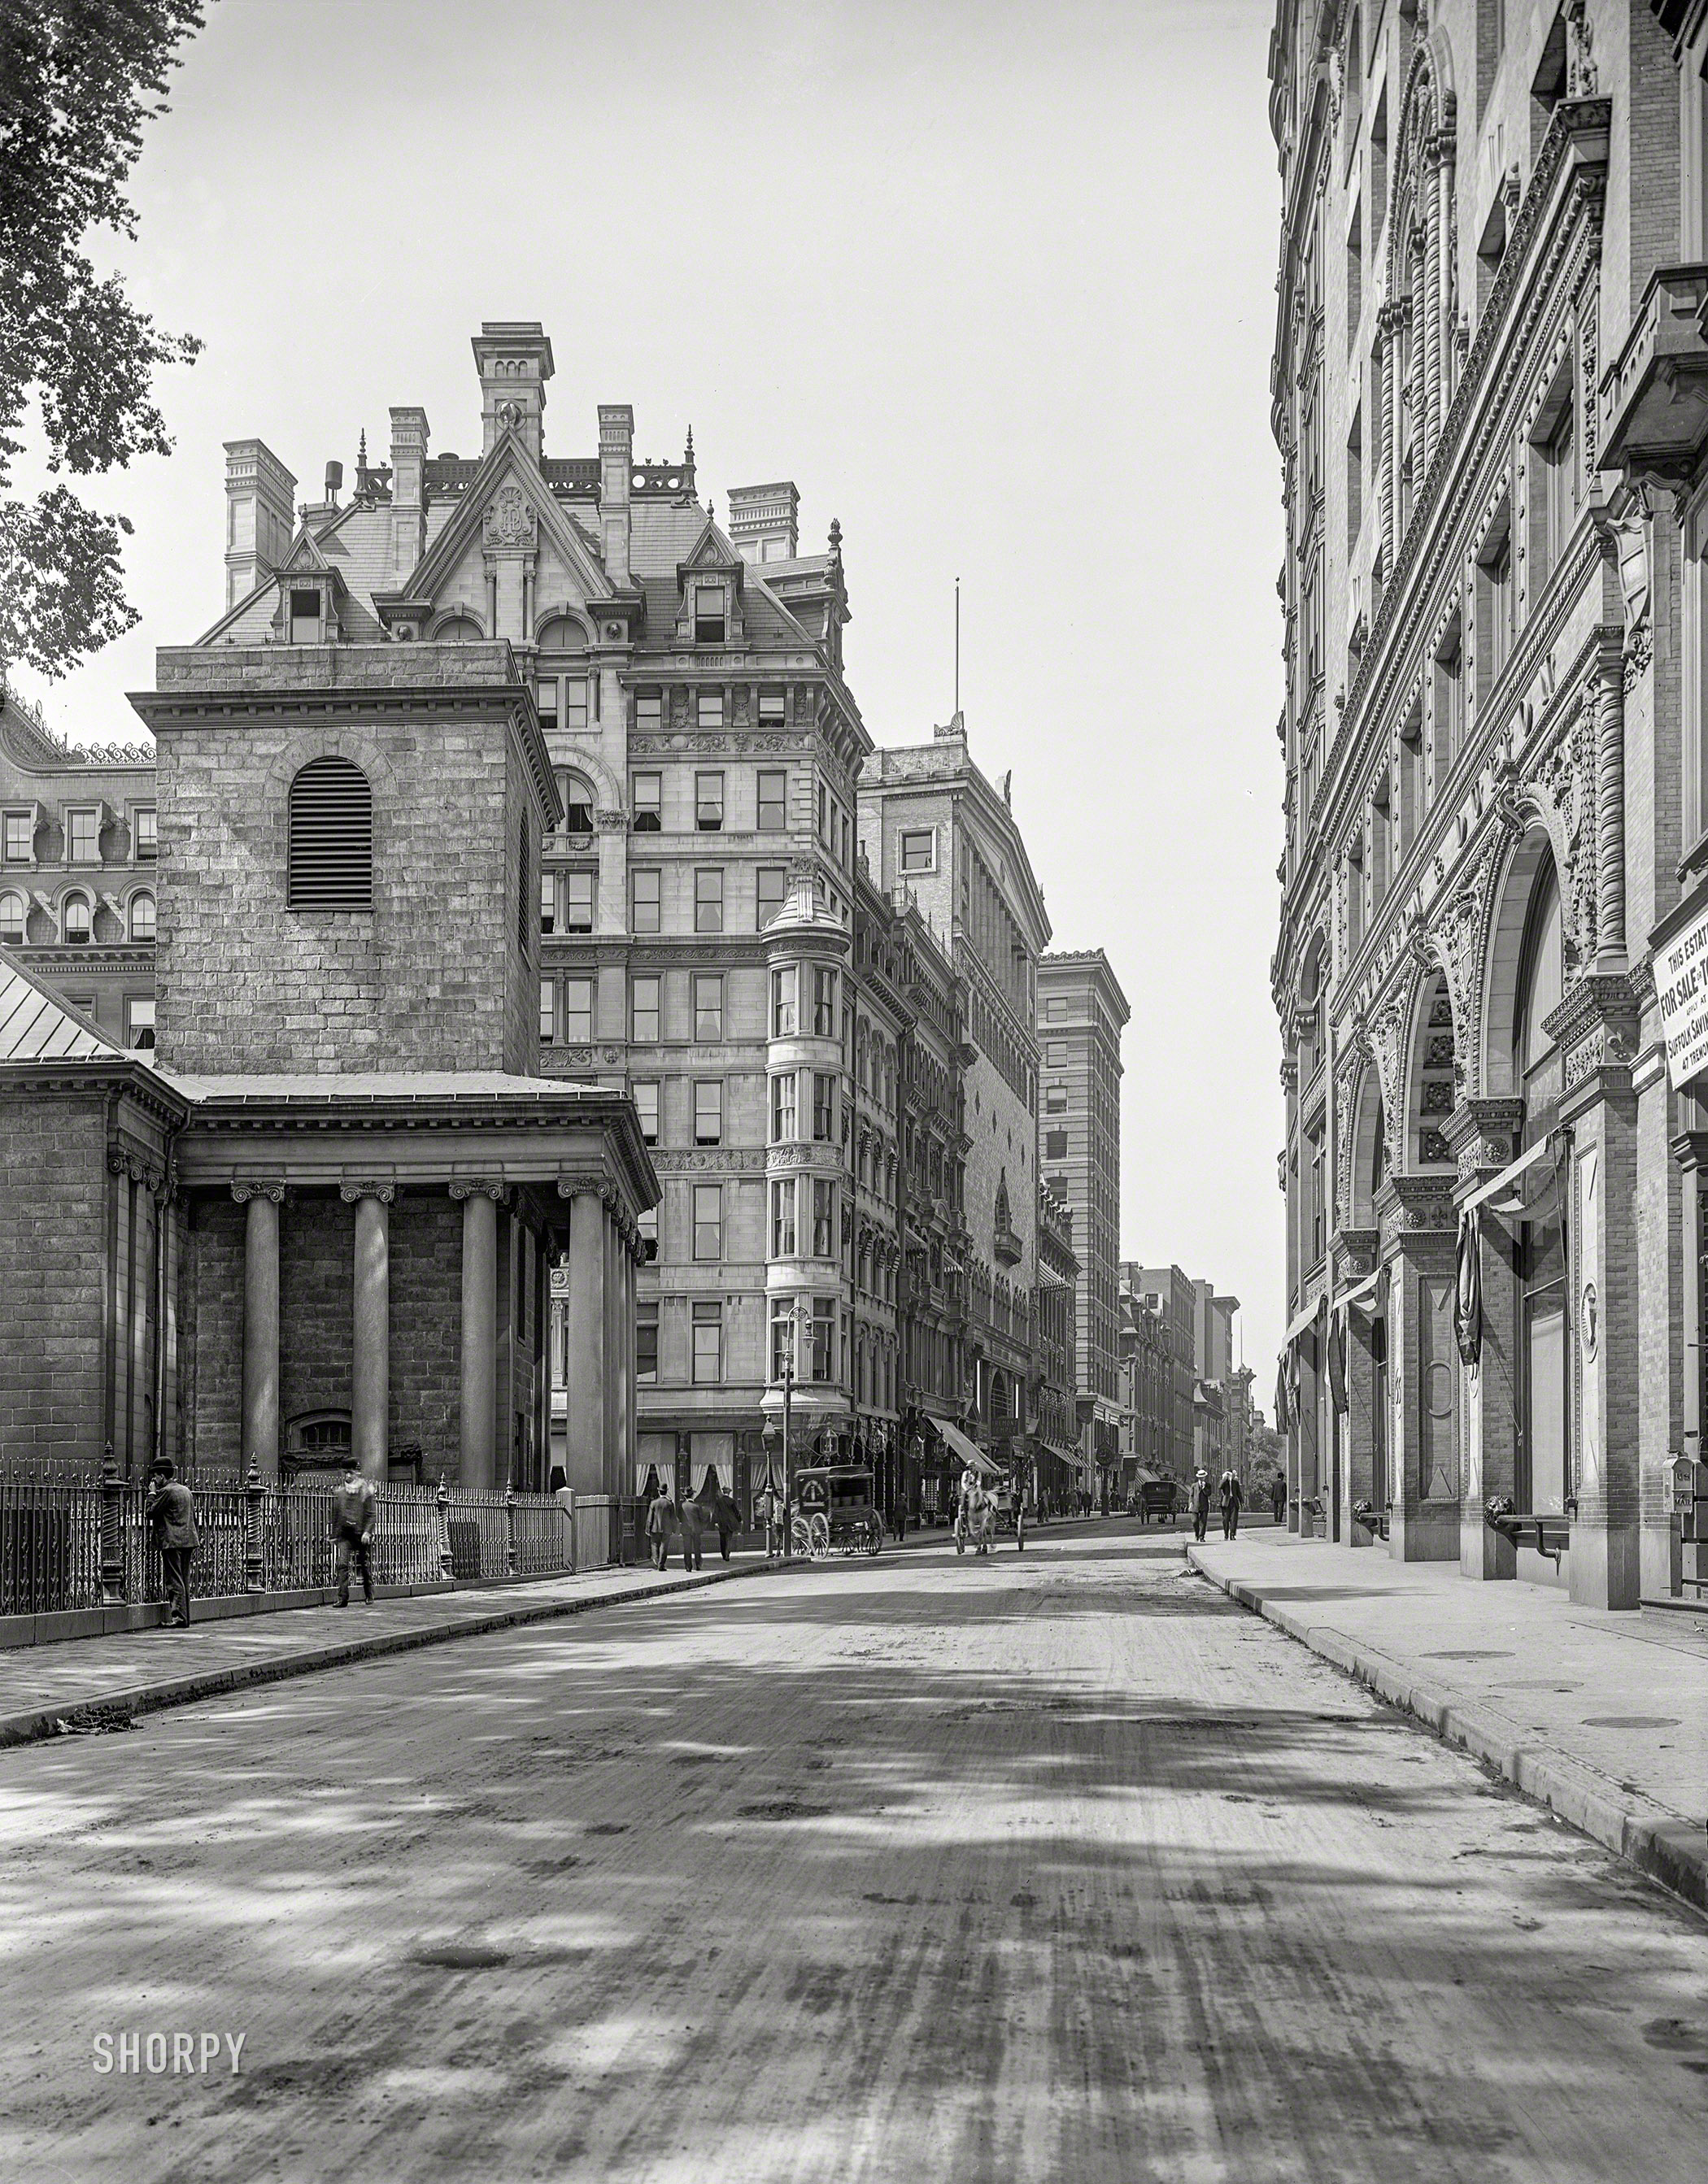 Shorpy Historical Picture Archive :: King's Chapel: 1906 high ...